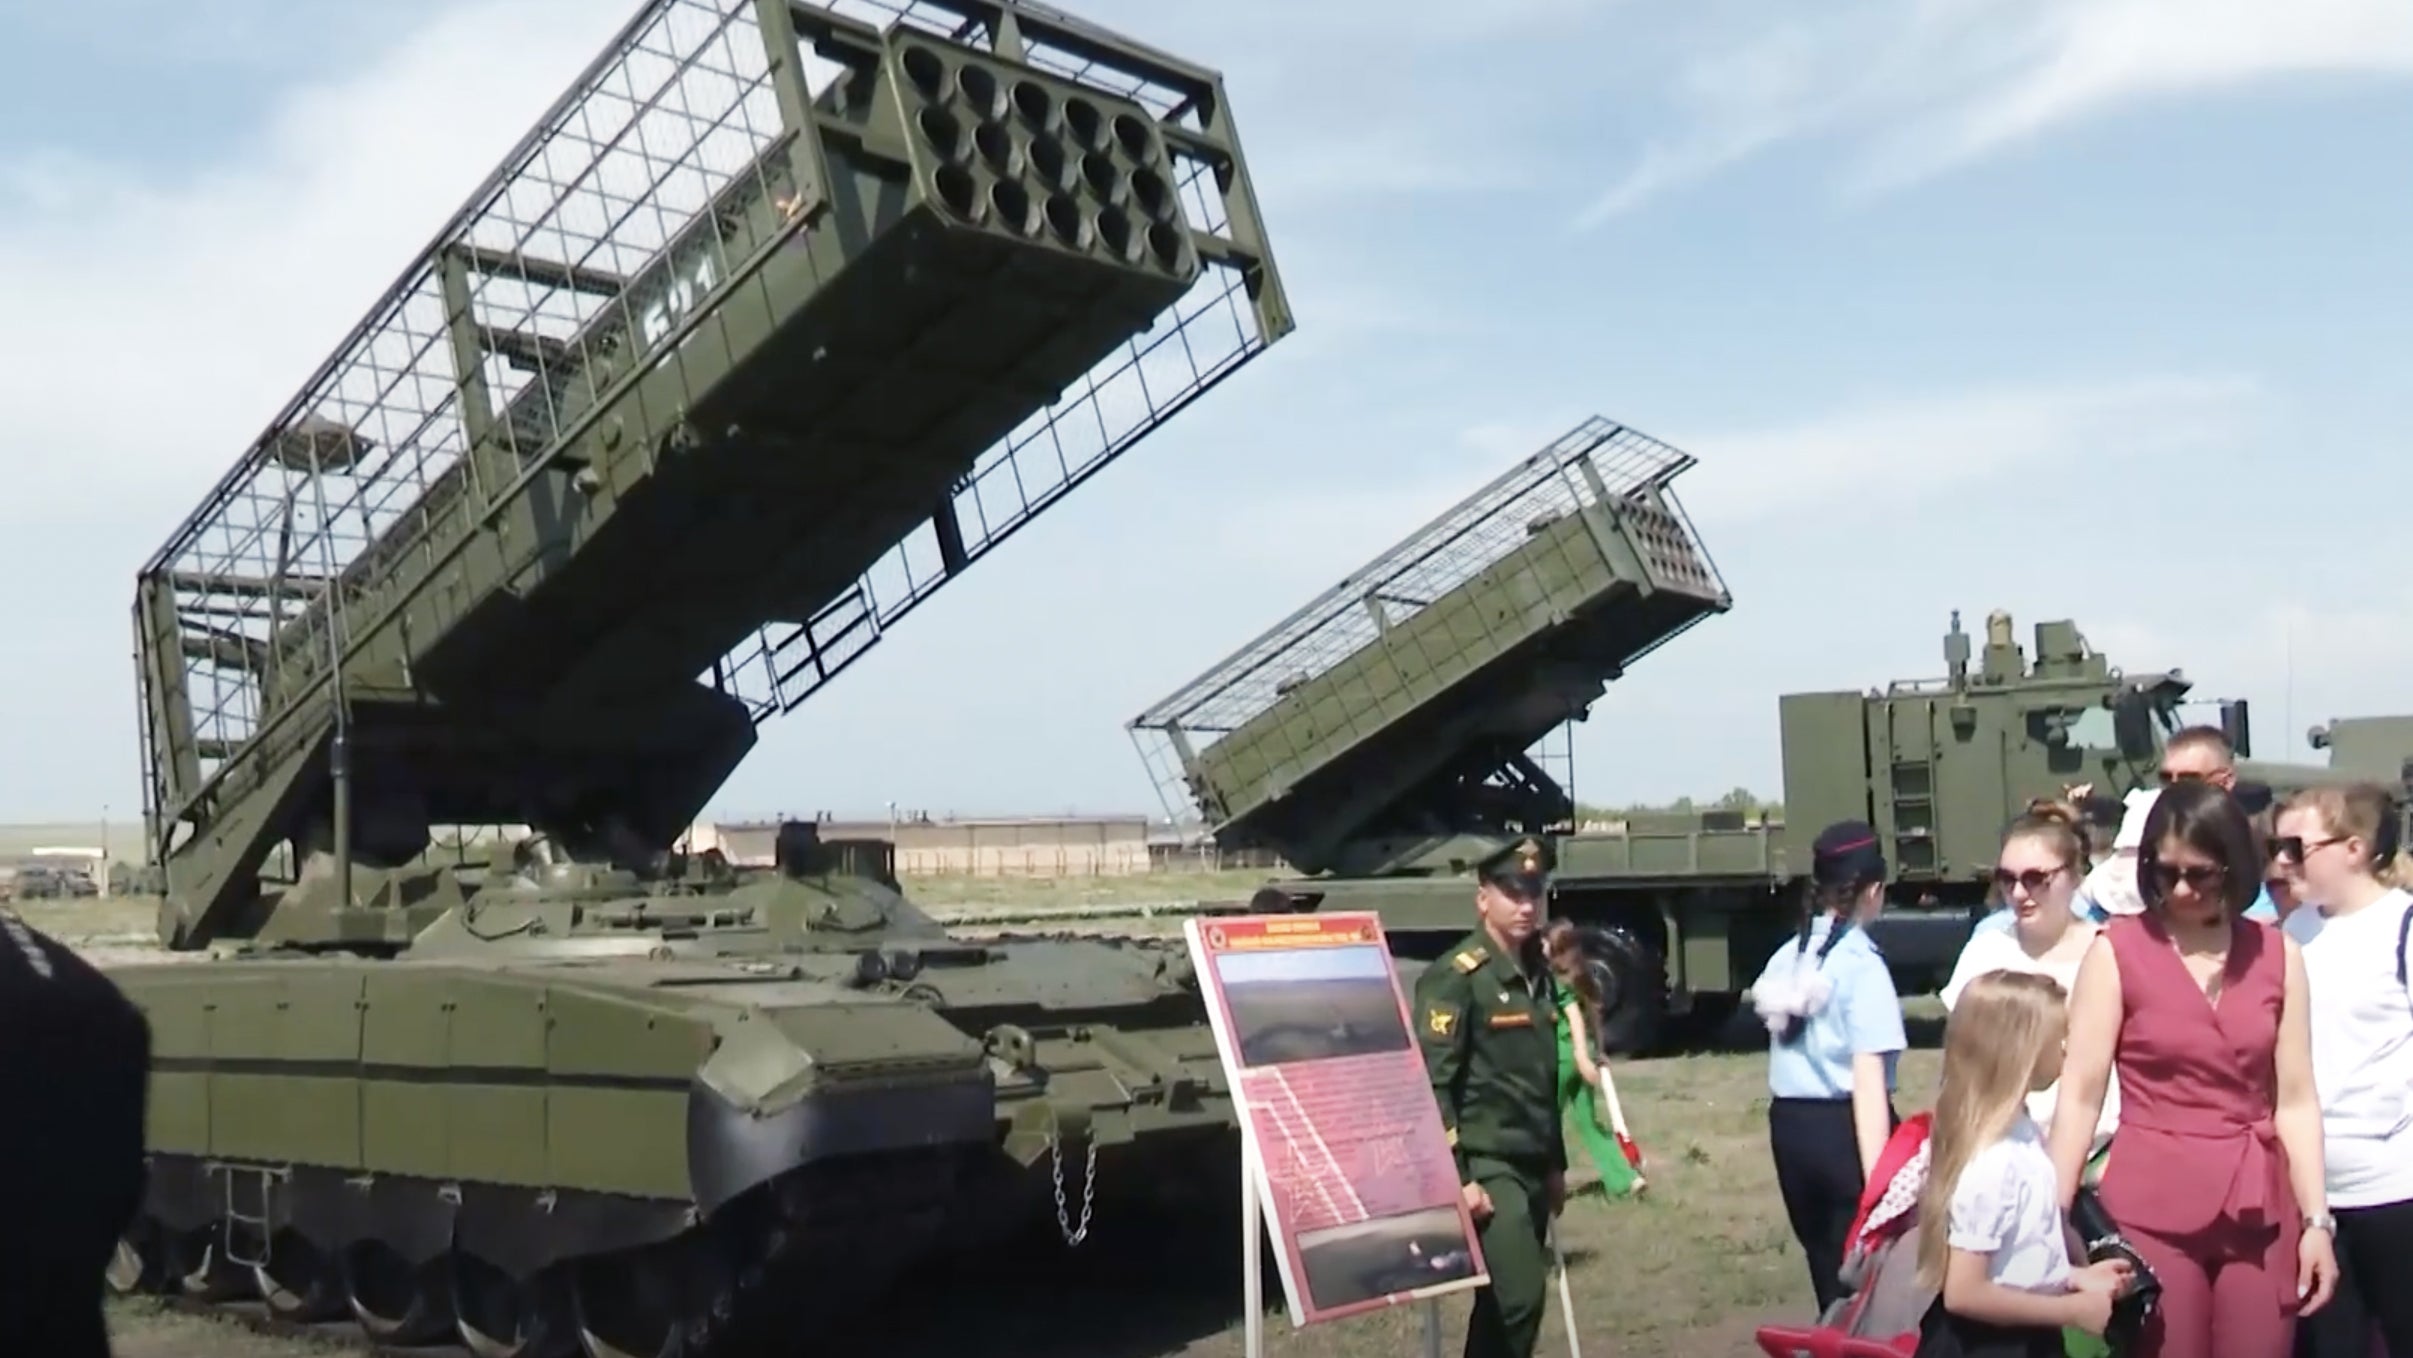 The latest iteration of Russiaâs TOS series of thermobaric rocket launchers has been seen, apparently for the first time, in military service. The TOS-3 Dragon was shown during an official event in Russiaâs southwest Saratov region, with its anti-drone screens pointing directly to experience from the war in Ukraine. With that in mind, it likely wonât be long before we start to see the TOS-3 being deployed in combat, especially as losses of the legacy TOS-1A continue to mount.